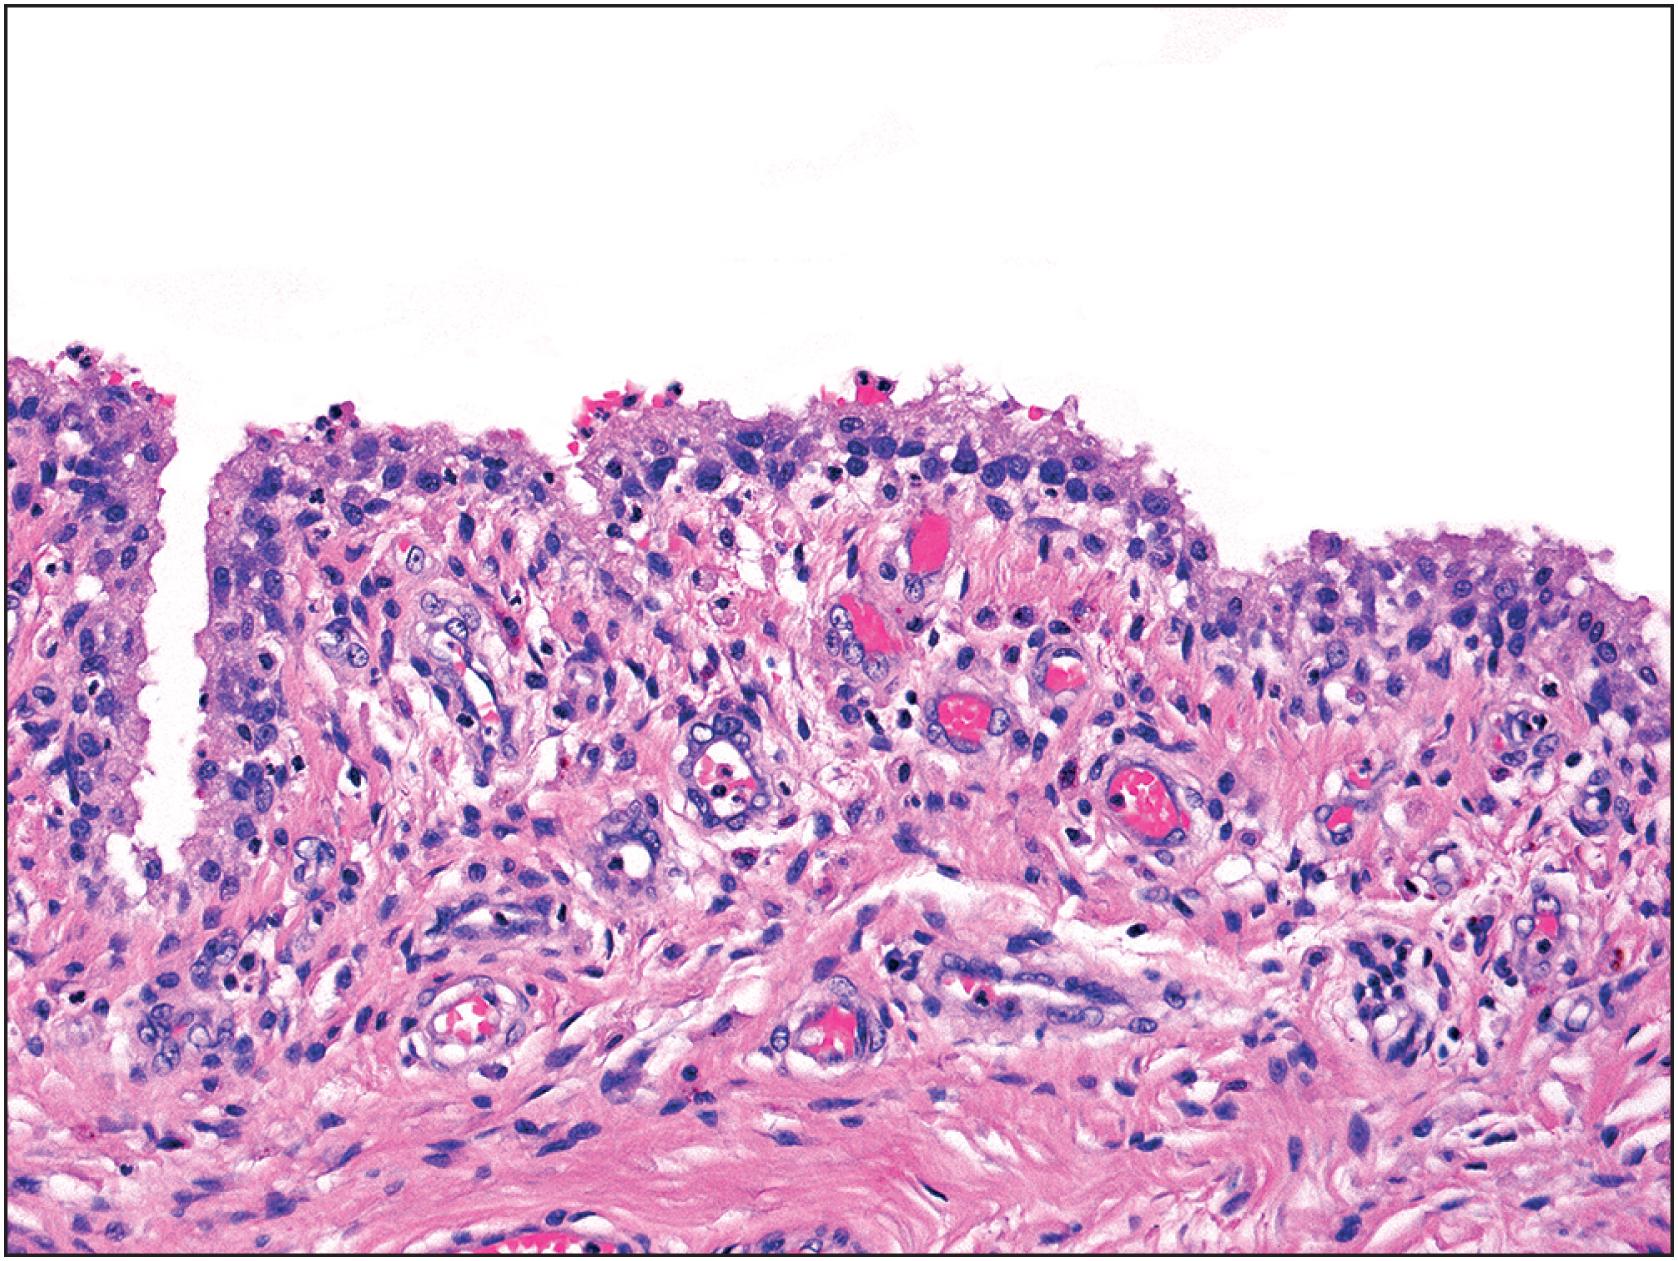 Fig. 13.3, Reactive synovium showing plump synoviocytes with abundant cytoplasm overlying connective tissue with prominent dilated capillaries.